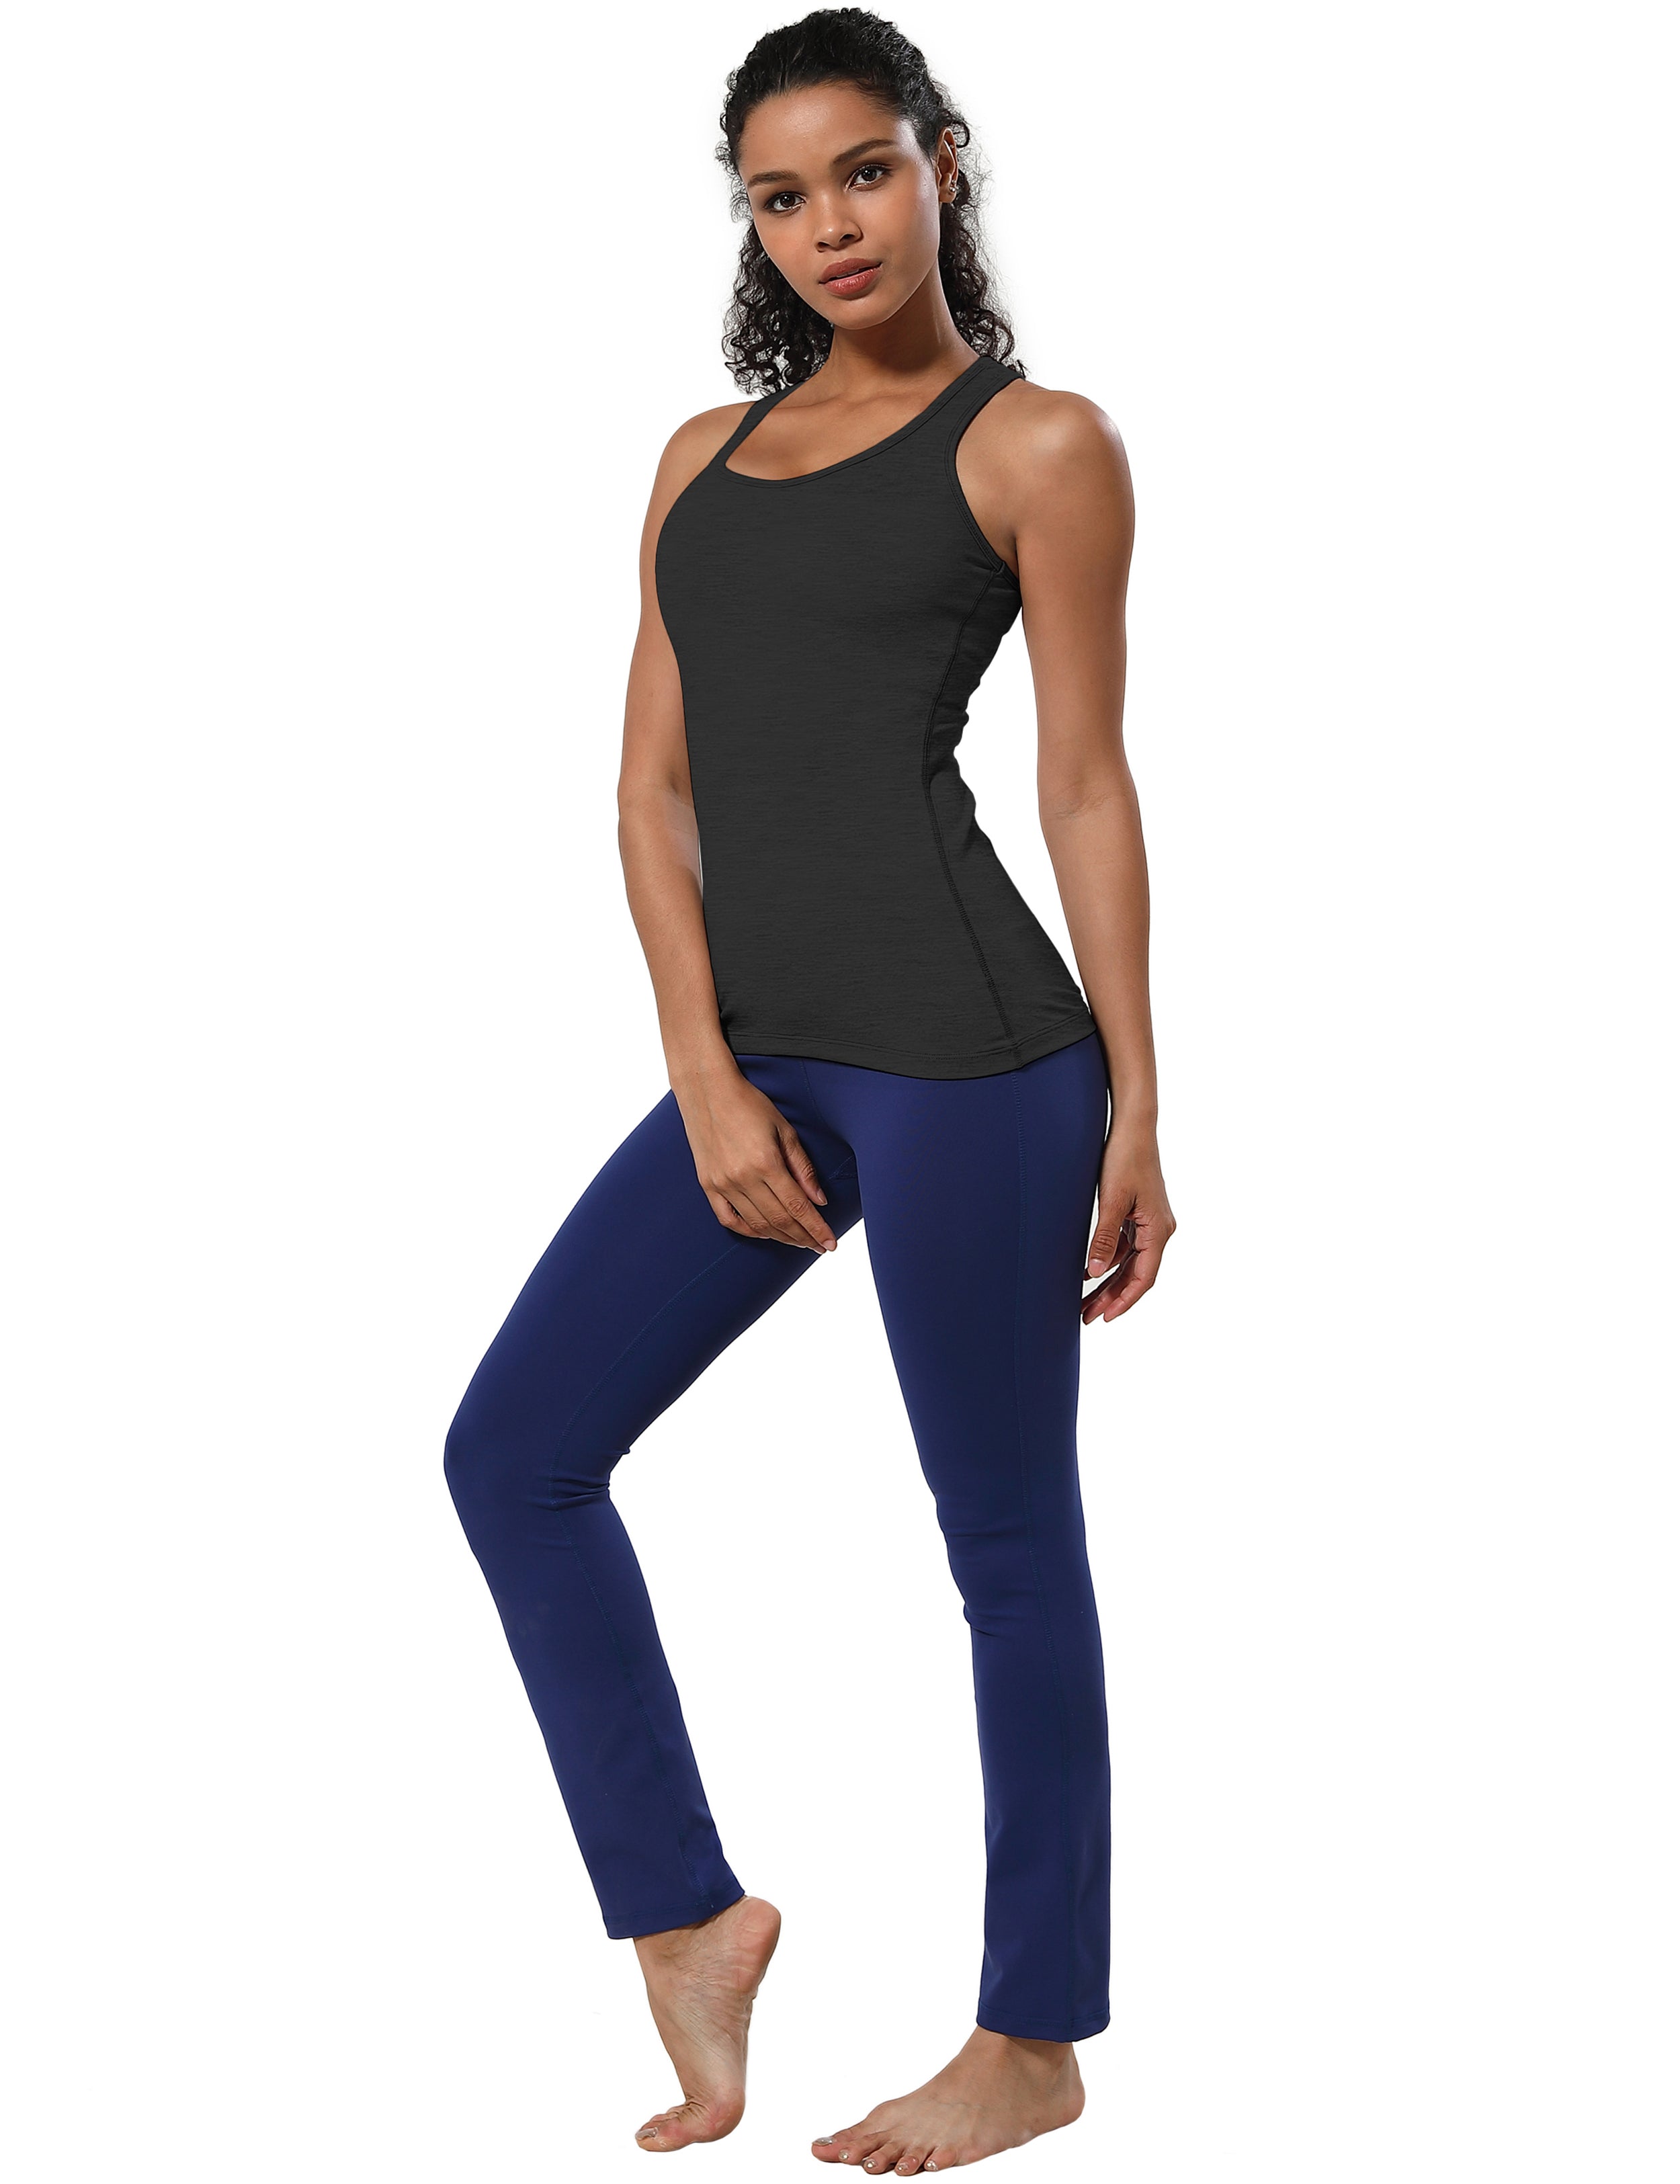 Racerback Athletic Tank Tops heathercharcoal 92%Nylon/8%Spandex(Cotton Soft) Designed for Tall Size Tight Fit So buttery soft, it feels weightless Sweat-wicking Four-way stretch Breathable Contours your body Sits below the waistband for moderate, everyday coverage